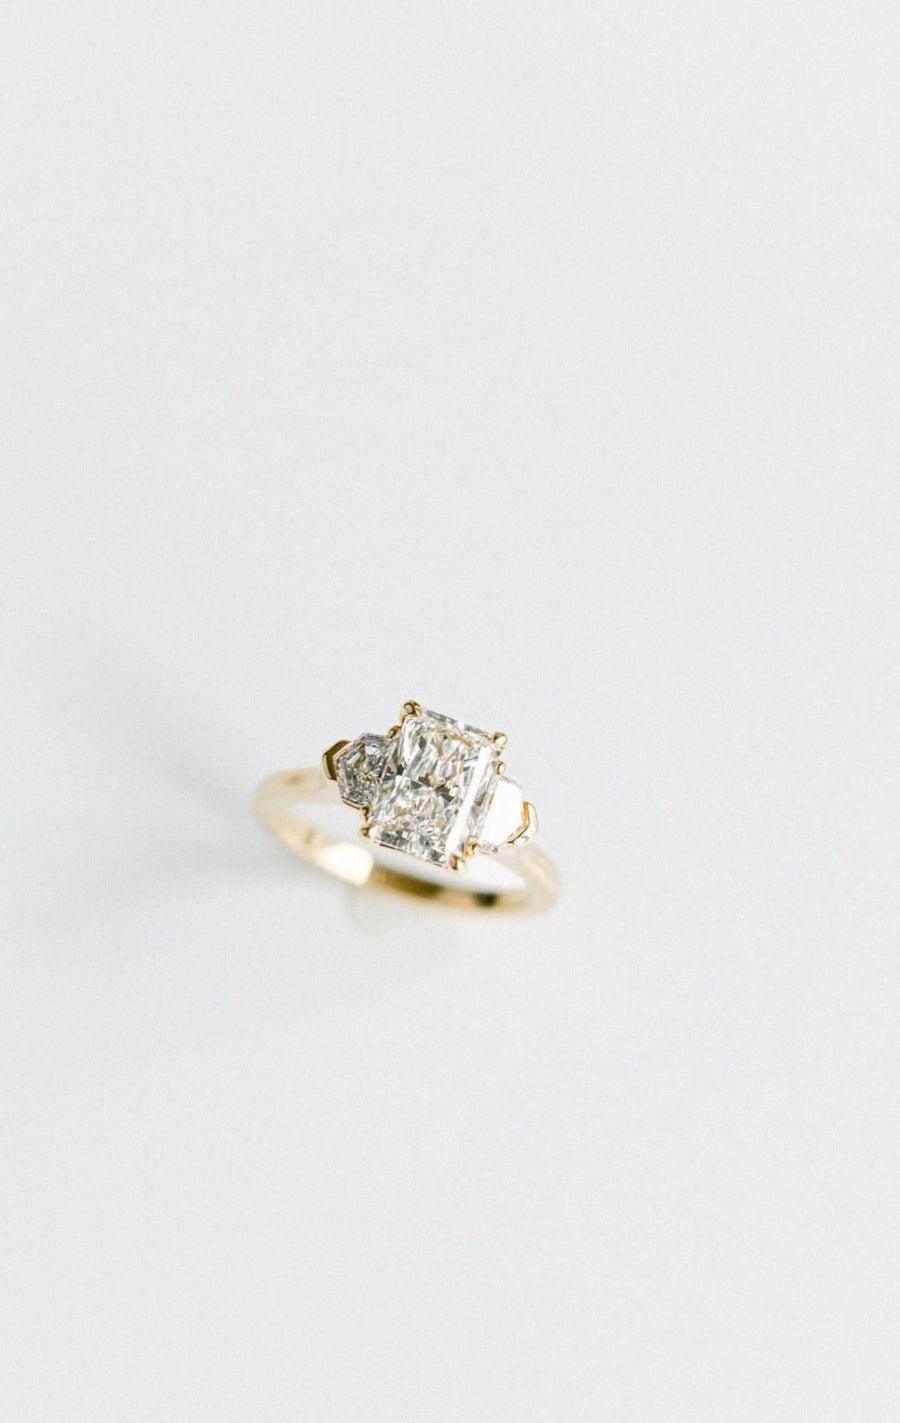 Radiant Cut Diamond Engagement Ring With Diamond Cadillac Accents, 14k Yellow Gold